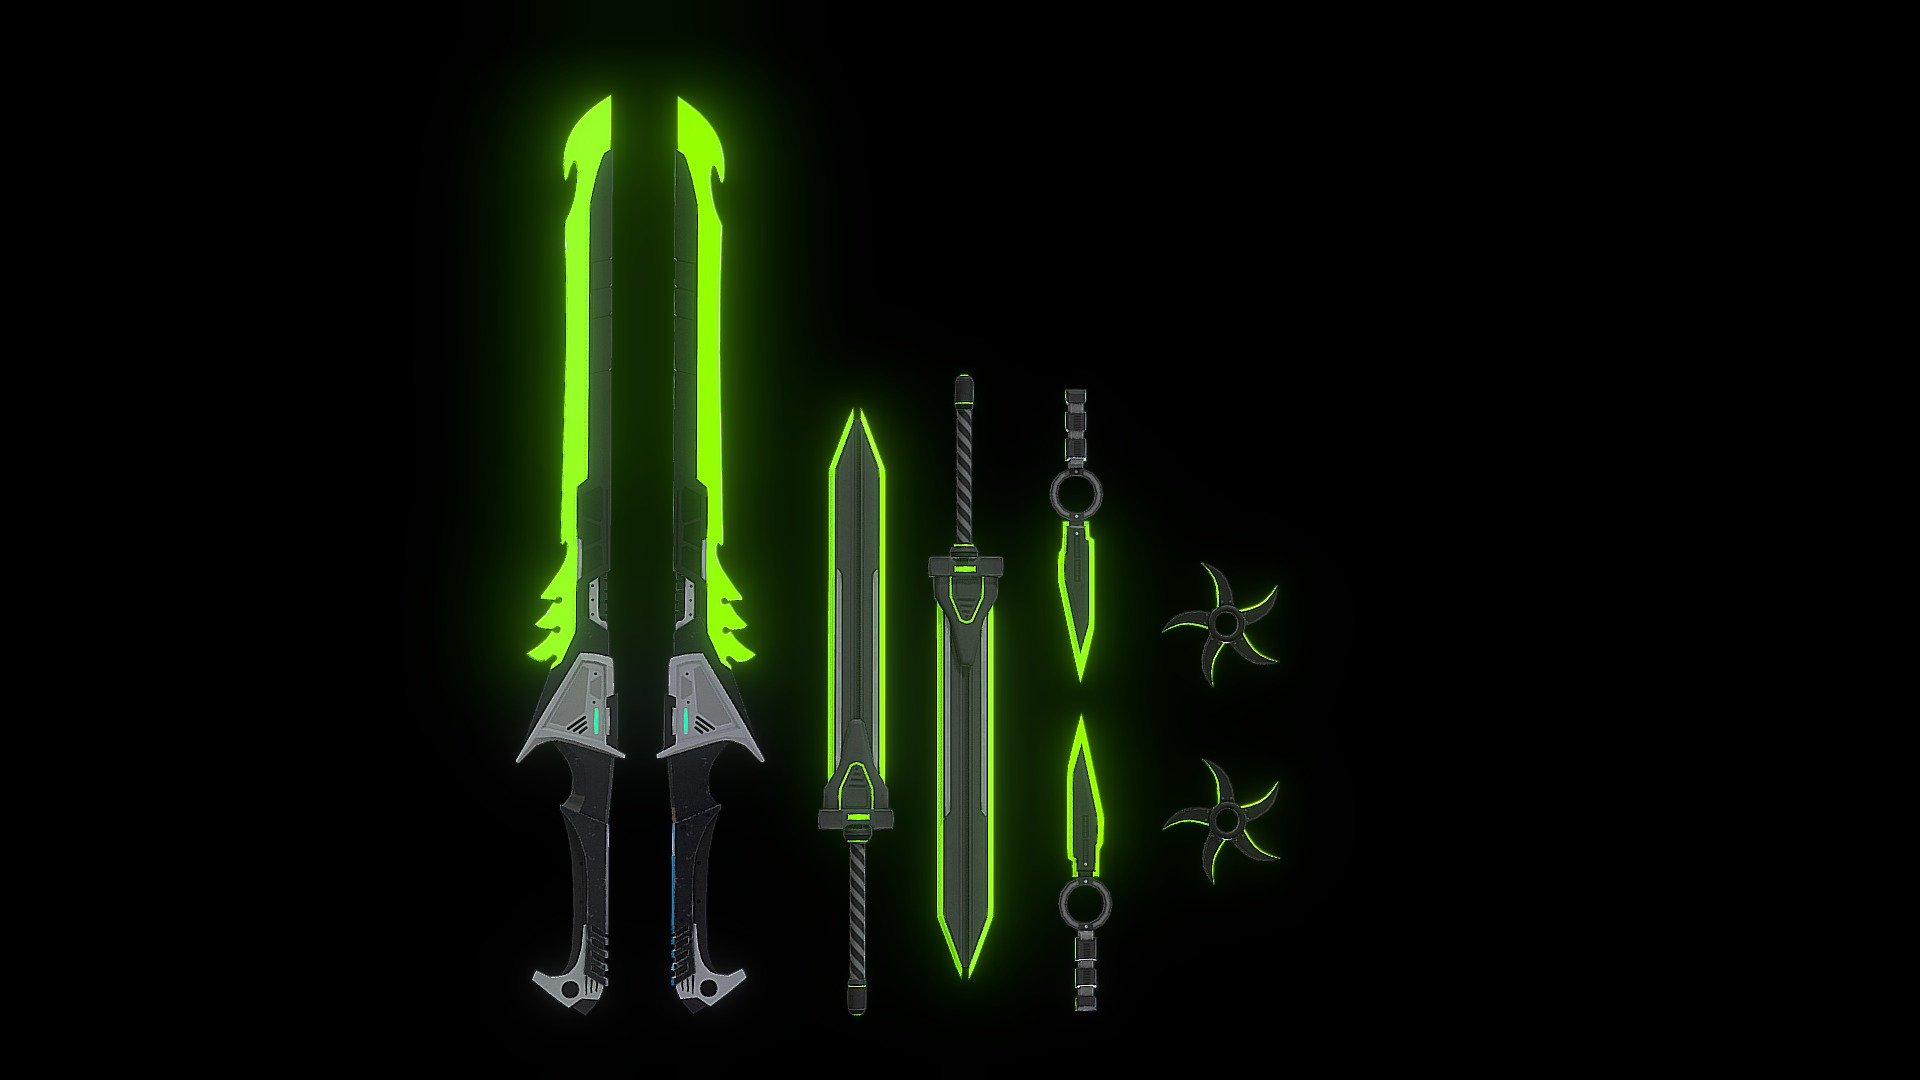 This asset contains a 3D model of the completer weapons set including: A long sword, short sword, a Knife, and a Shuriken that can easily be integrated into any environment. It is a highly detailed model with texture customizable, realistic weaponry. This model promises you a neat &amp; tidy design that would completely make the integration of this asset in your game much easier. This weapon set contains the following items:
•   NeoCyber One Handed Long Sword: A beautiful Long Sword with realistic texture and detailing and futuristic handle and hilt.
•   NeoCyber Short Sword: A Short Sword with realistic texture and detailing and Simple yet subtle eye-catching hilt and handle.
•   NeoCyber Slip Knife: An additional accessory to the weapons set is the NeoCyber Slip Knife. Best when incorporated for stealth based games.
•   NeoCyber Shuriken: Of course, no weapons set will be complete without a throwable item. A more towards the traditional side but still very useful. A perfect harmony between aesthetically deadly 3d model